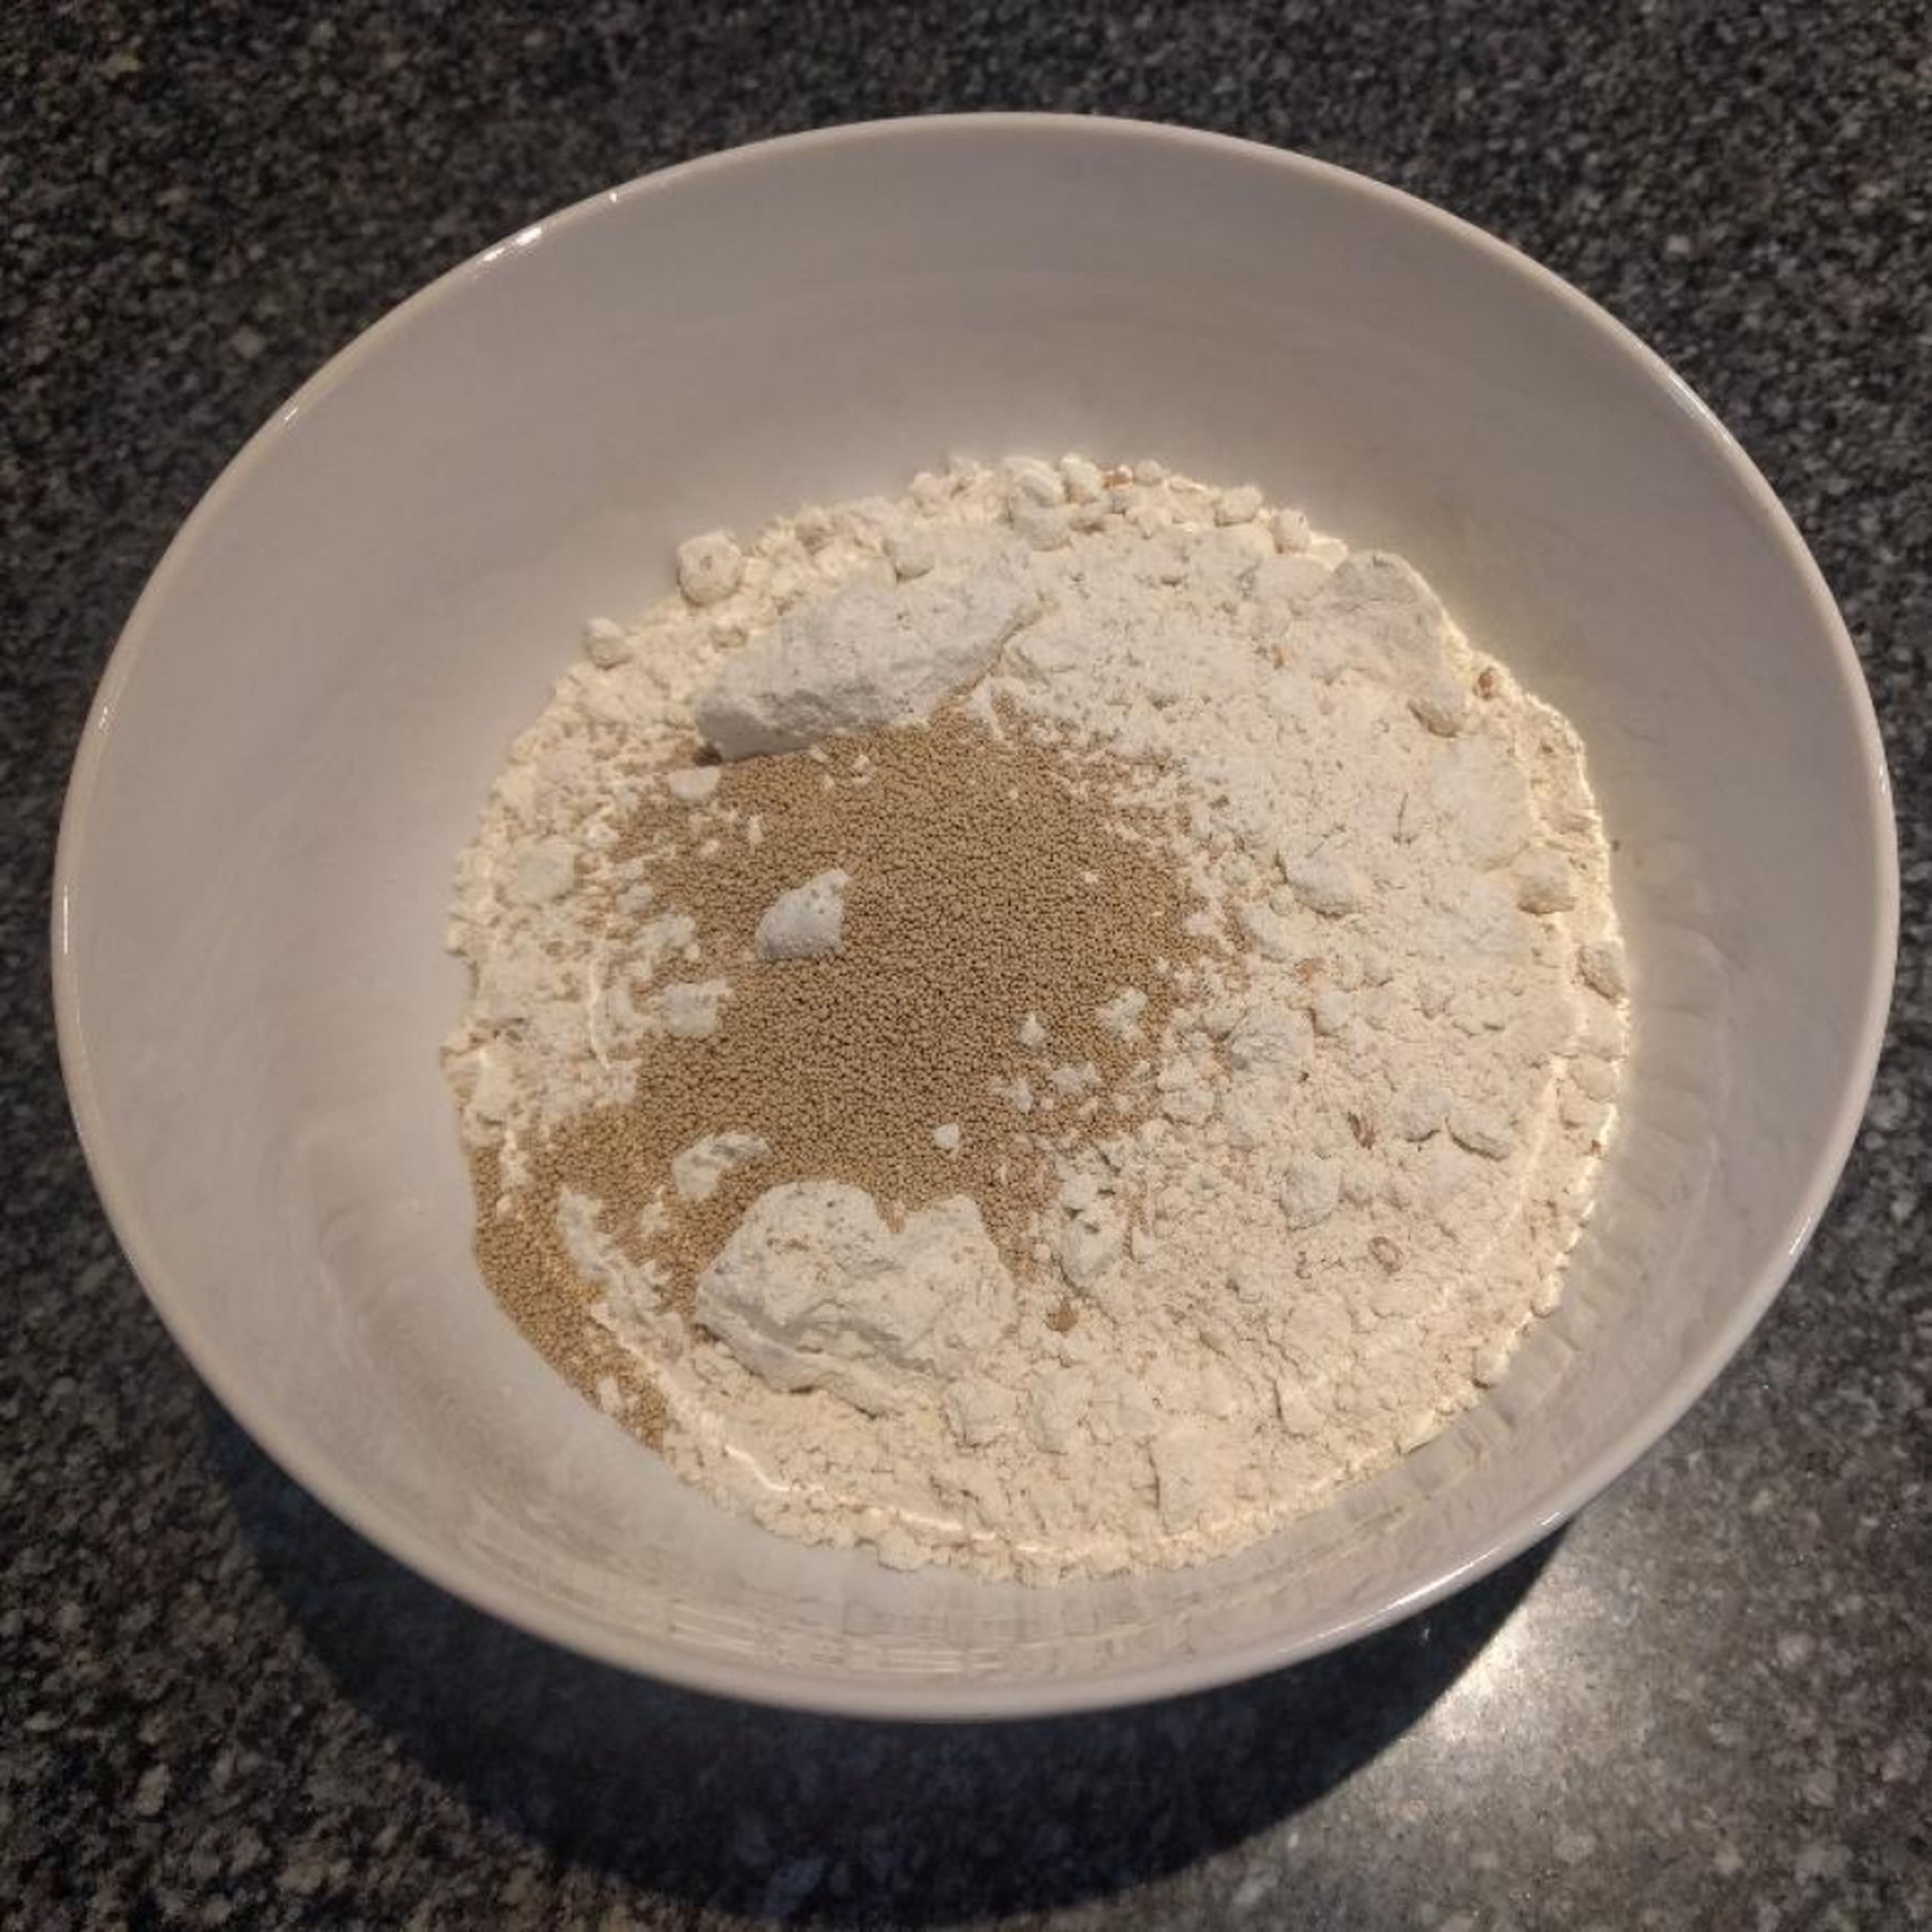 Mix bread flour, active dry yeast, and salt in a large bowl.